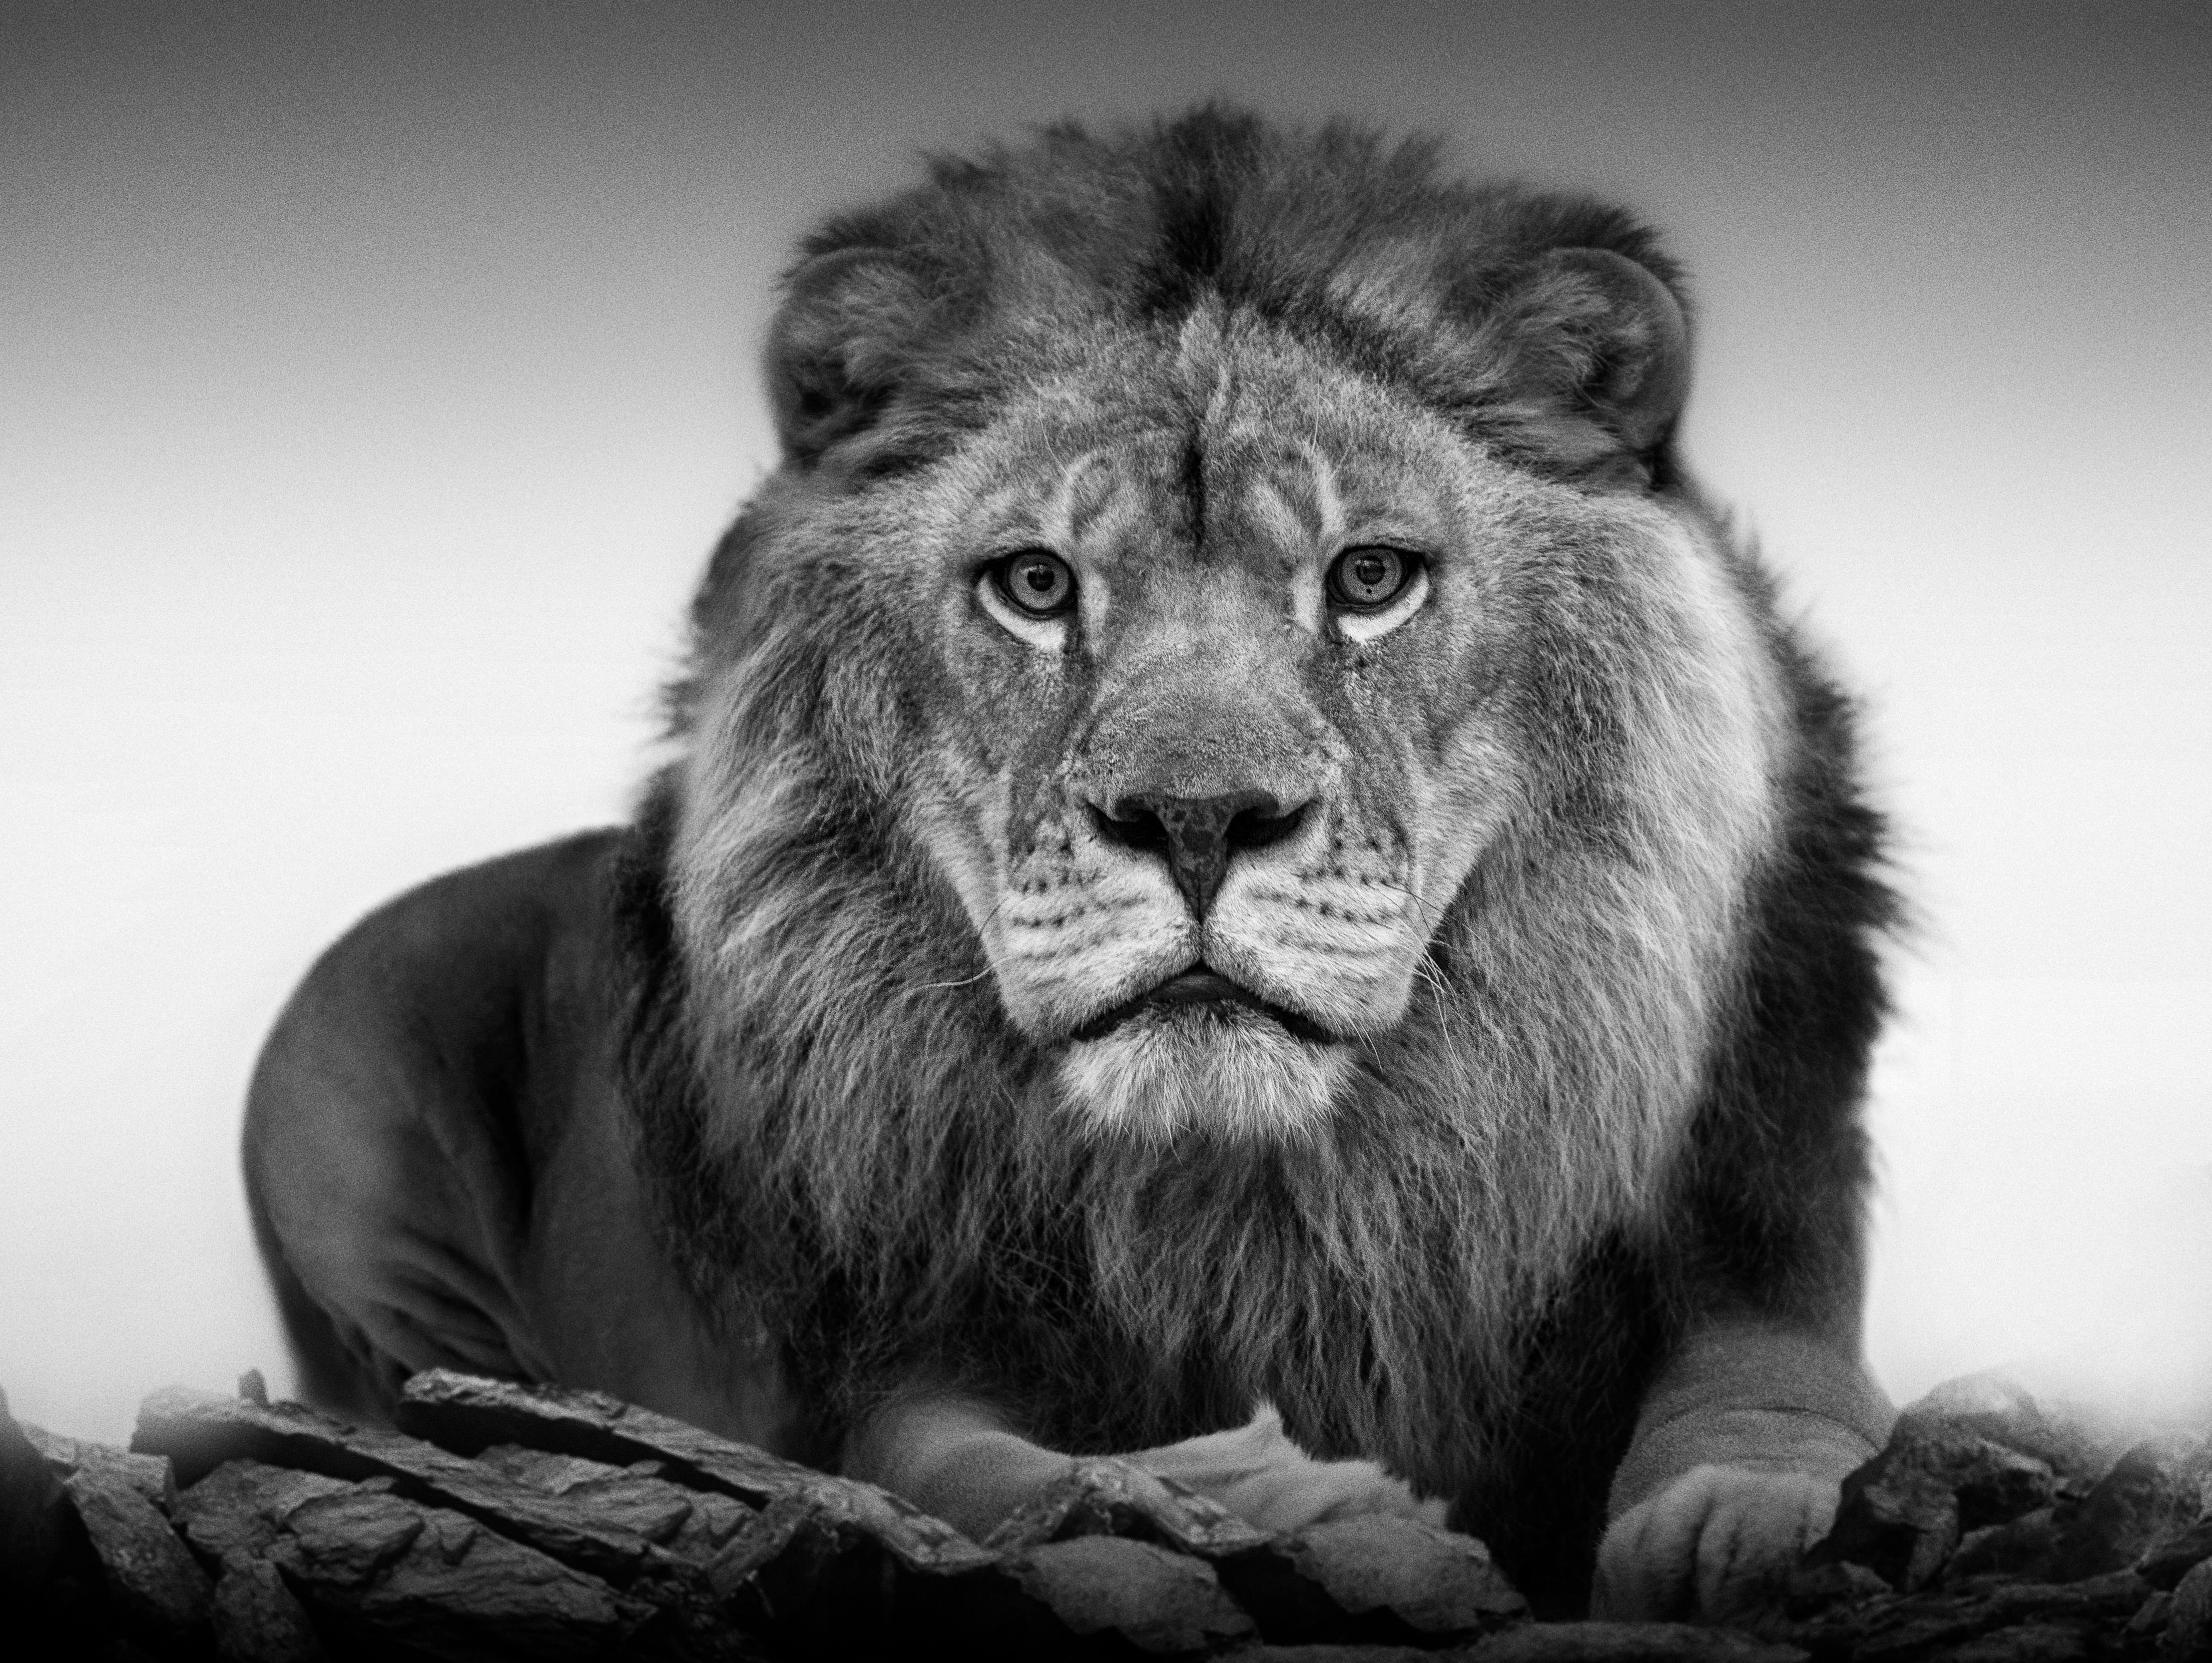 Shane Russeck Black and White Photograph - 36x48 "Lion Portrait" Black and White Lion Photography, Photograph Unsigned Art